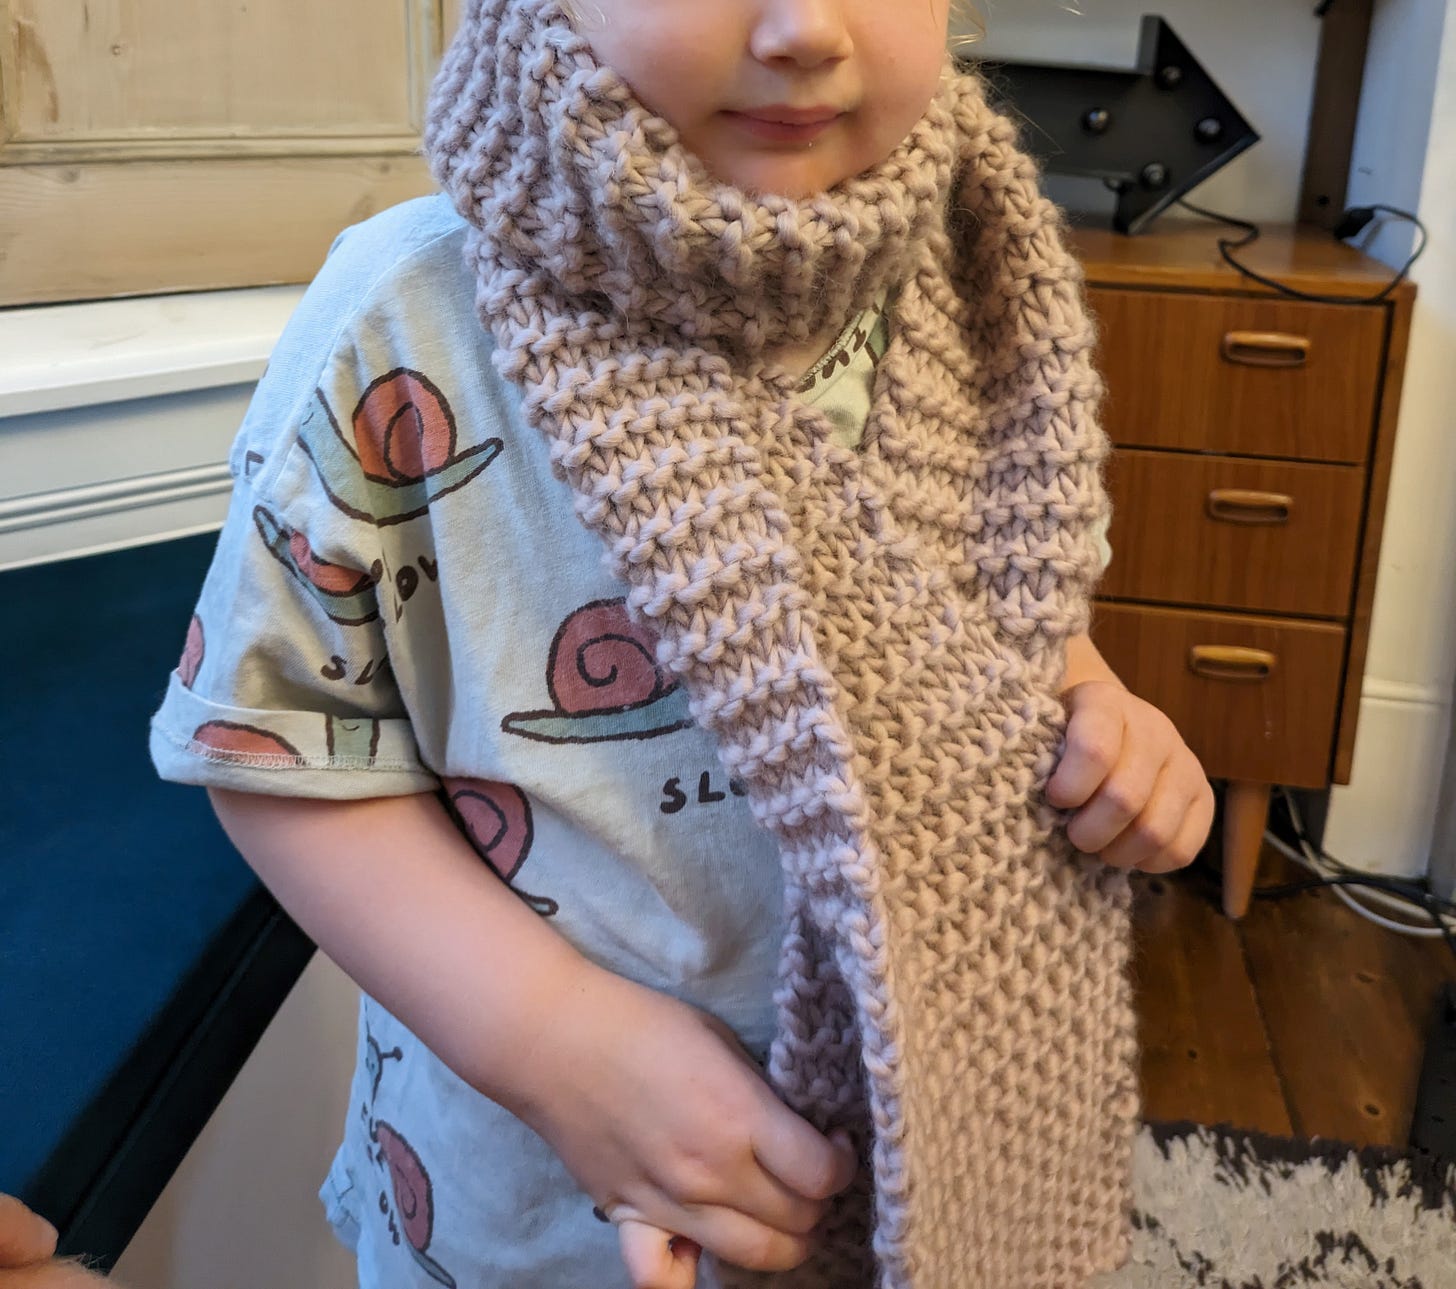 Scott's daughter wearing a hand-knitted scarf